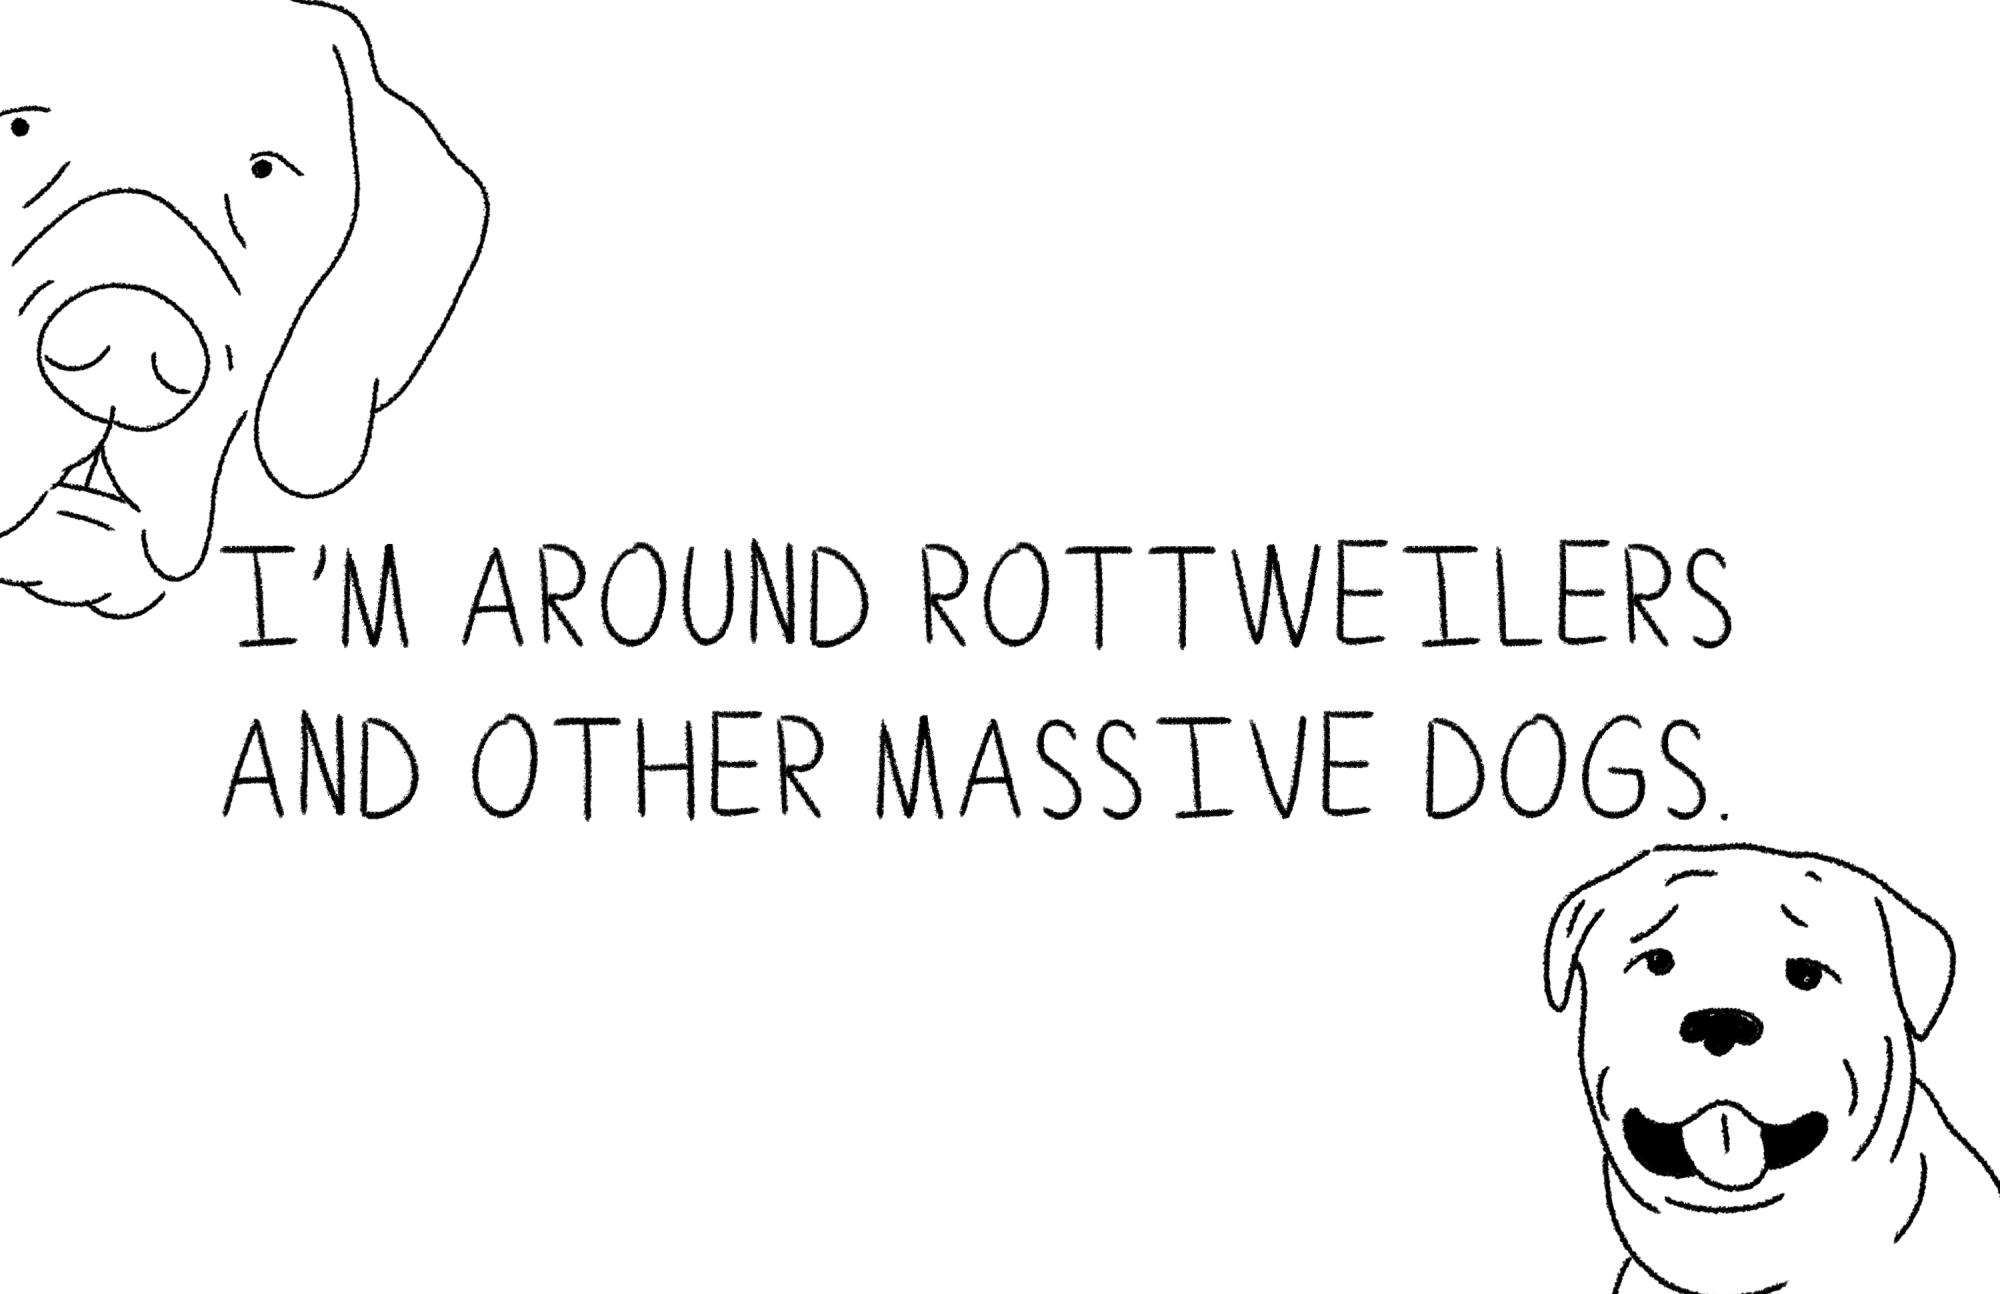 illustrations of a Great Dane and a rottweiler with text: I'm around rottweilers and other massive dogs. 